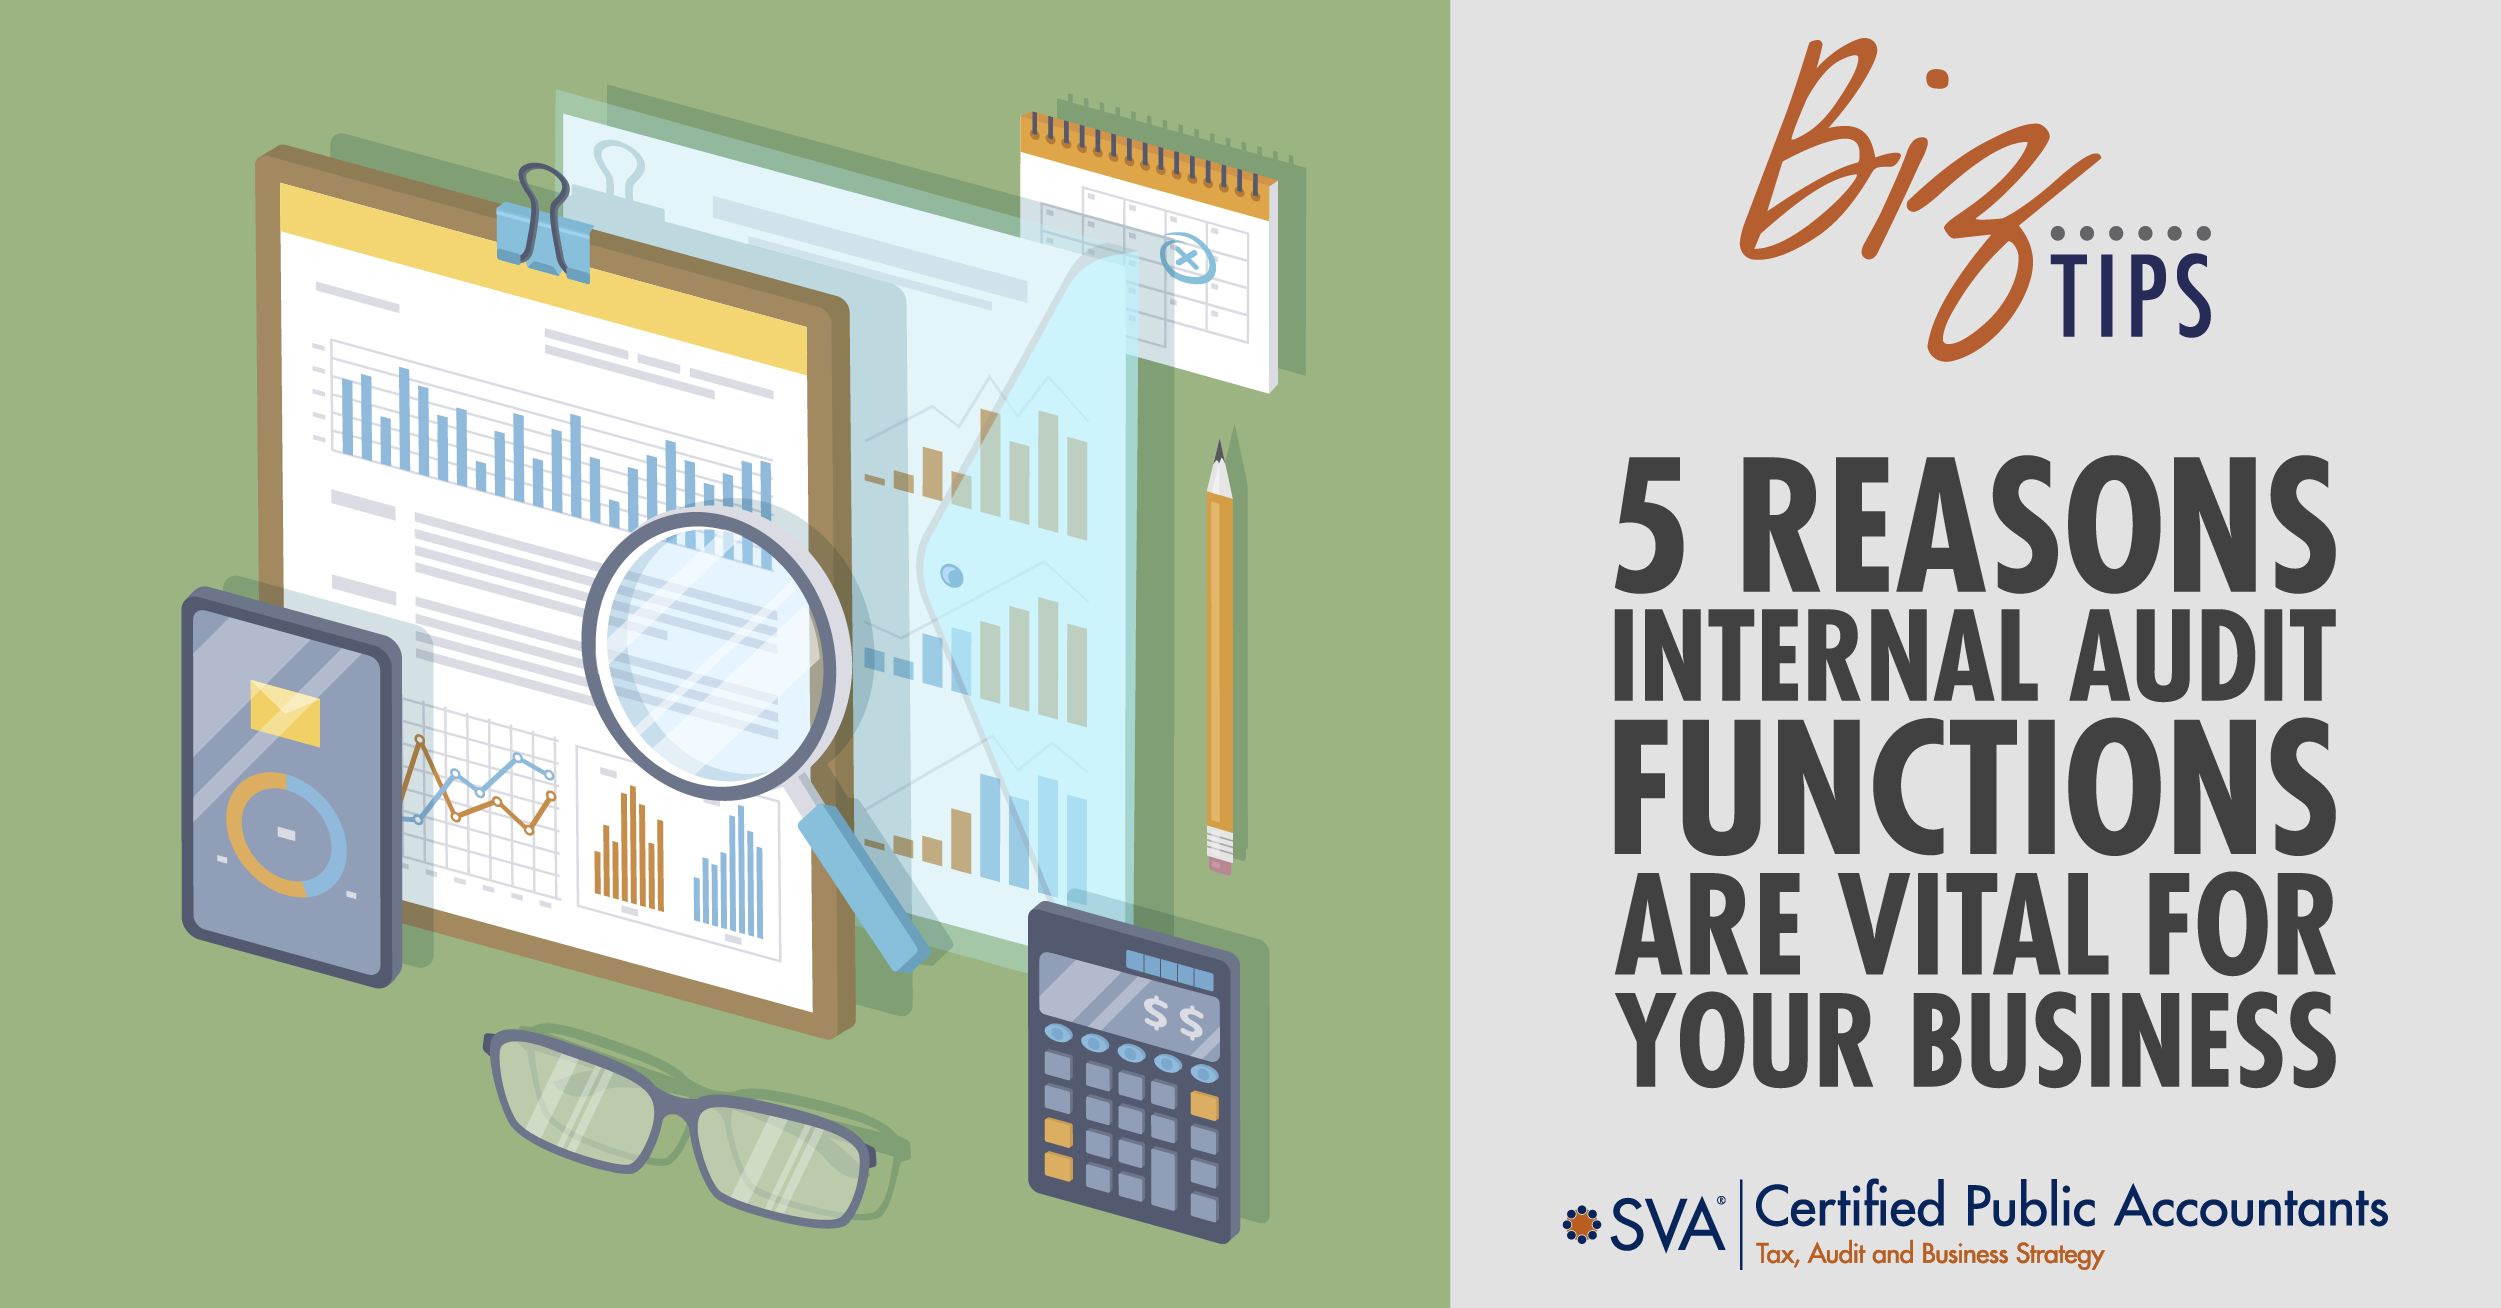 5 Reasons Internal Audit Functions are Vital for Your Business